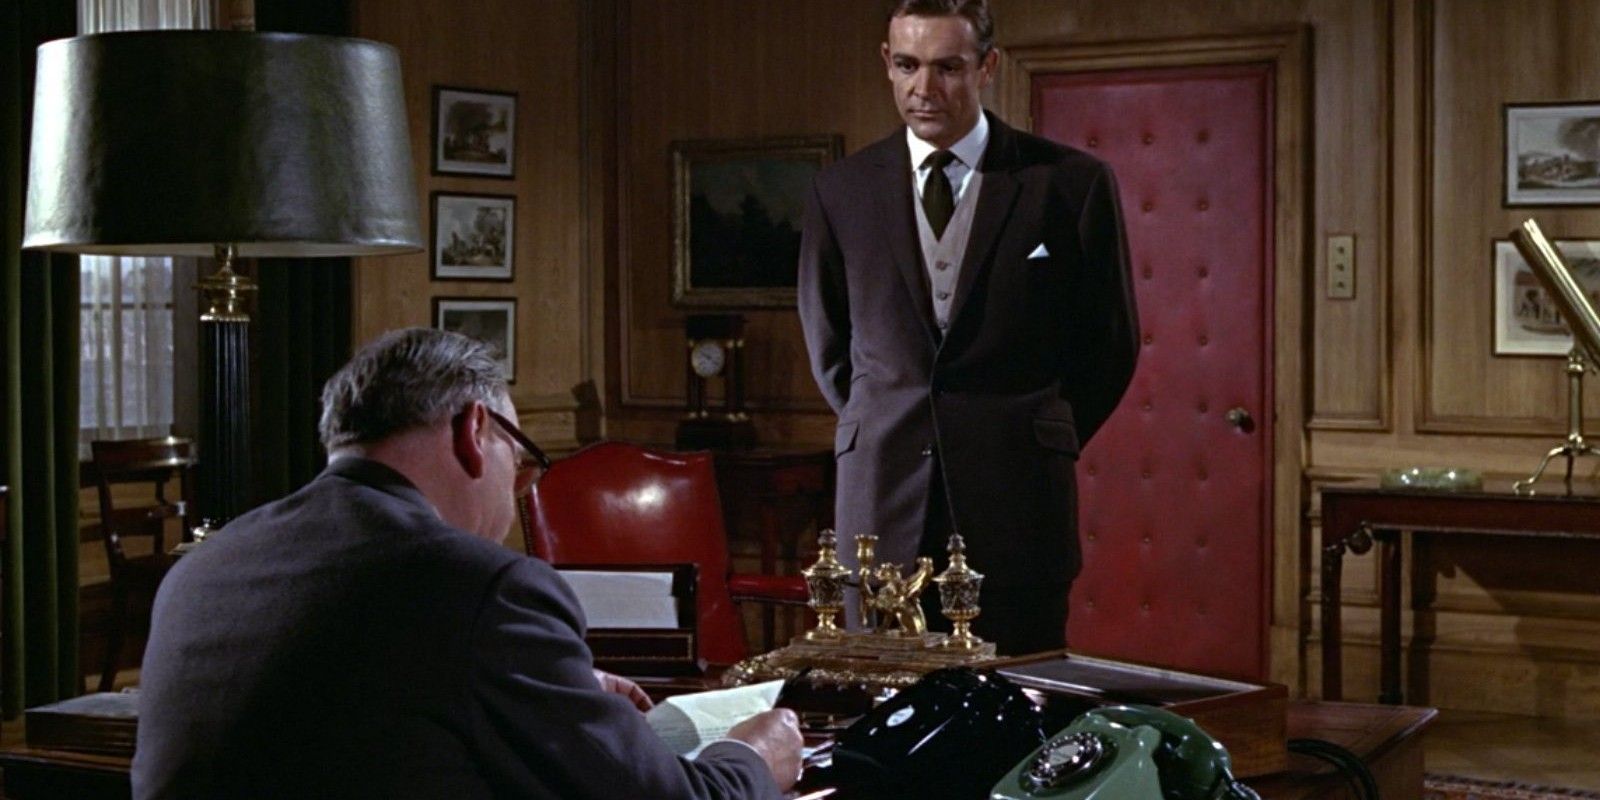 Bernard Lee as M and Sean Connery as James Bond in Goldfinger